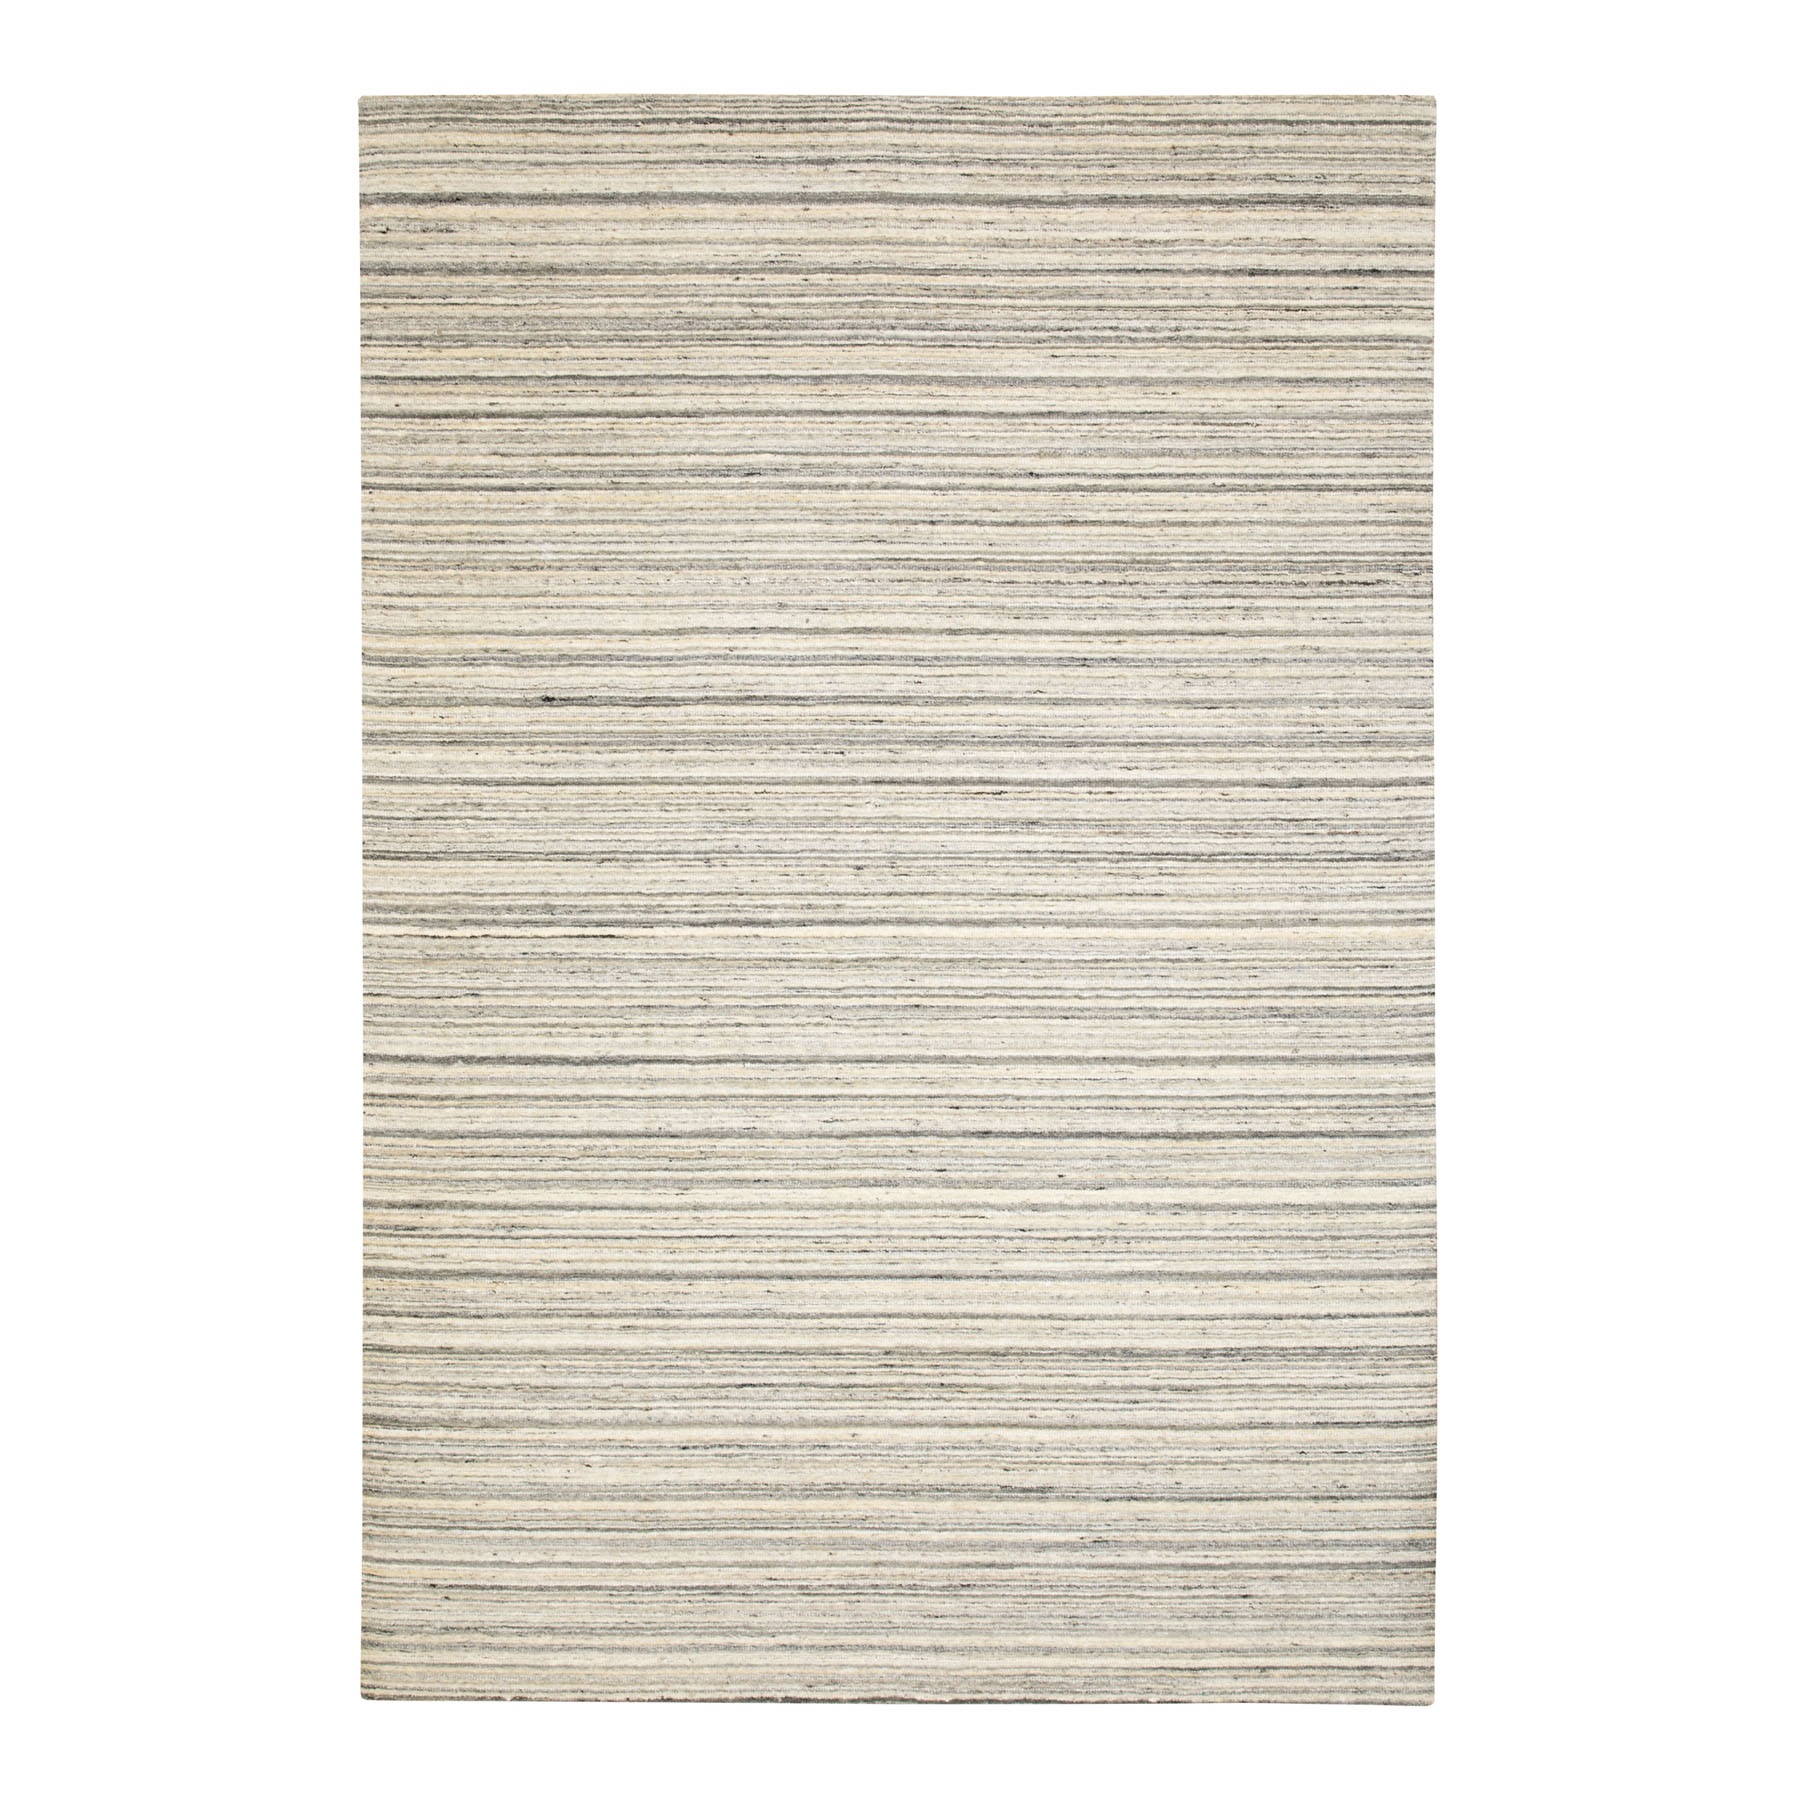 Modern & Contemporary Wool Hand-Woven Area Rug 6'0